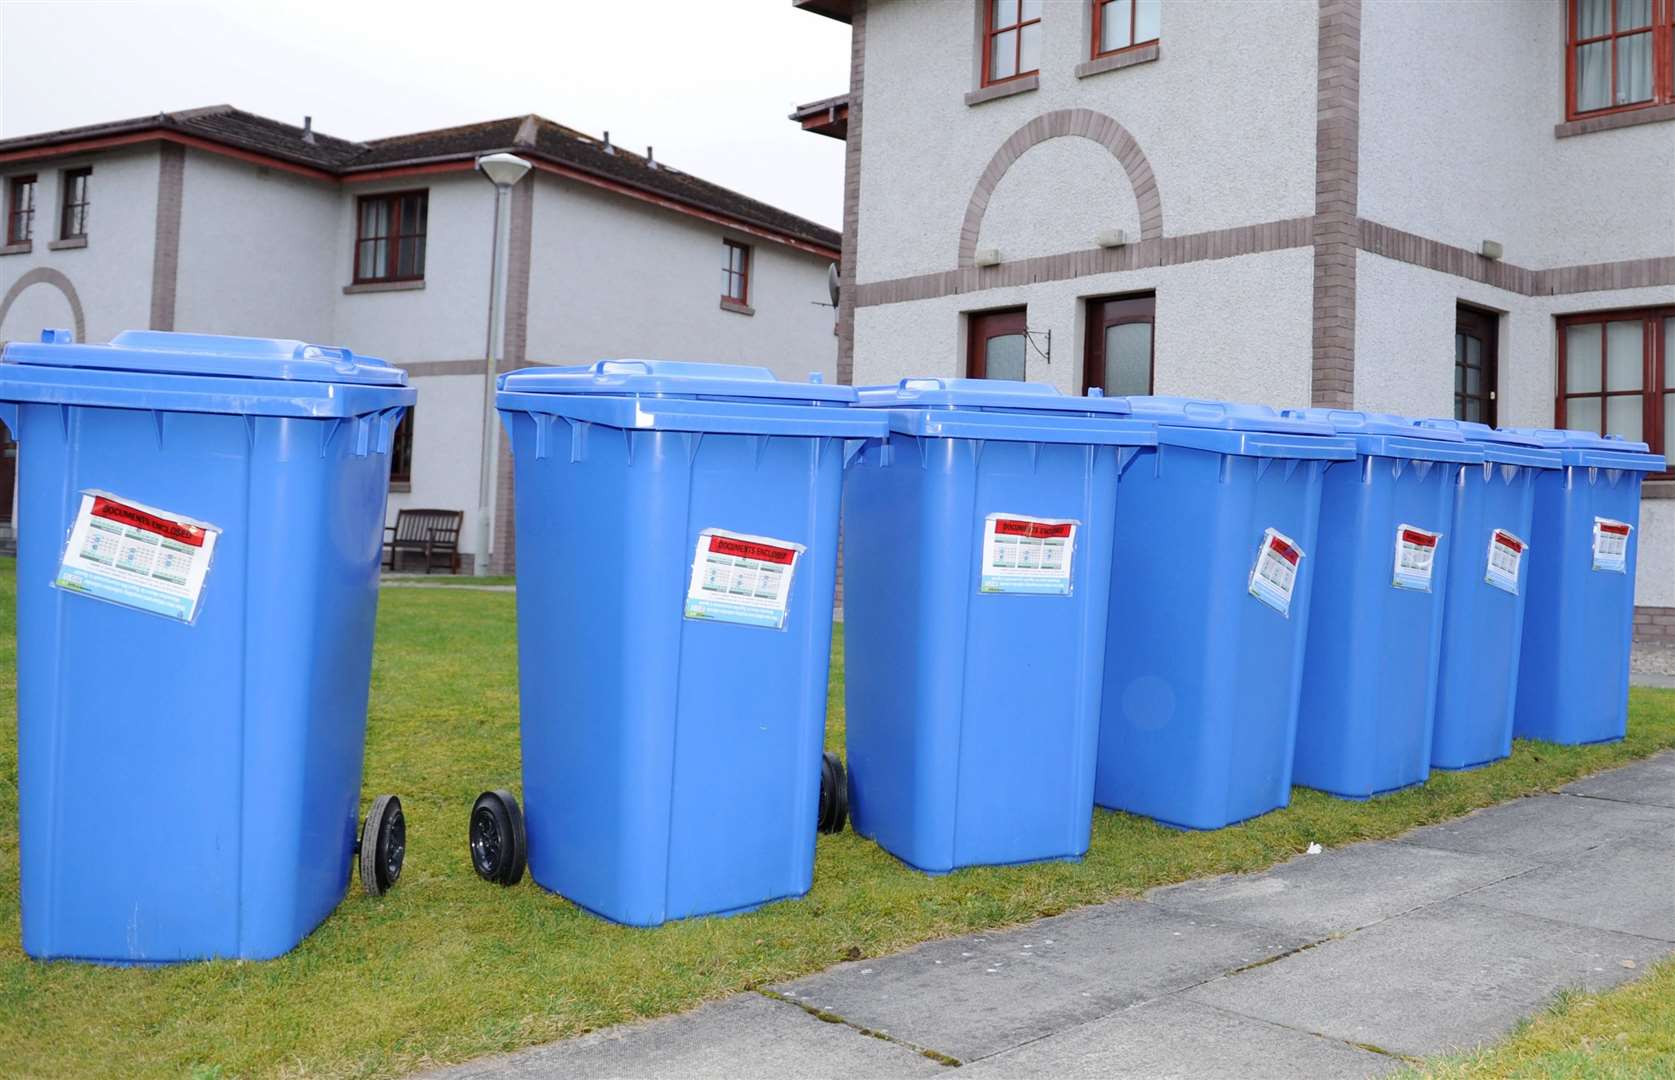 Resident of Miller St Inverness, Charlie Murray, has complained to the Highland Council about his street being left covered in blue recyling bins.